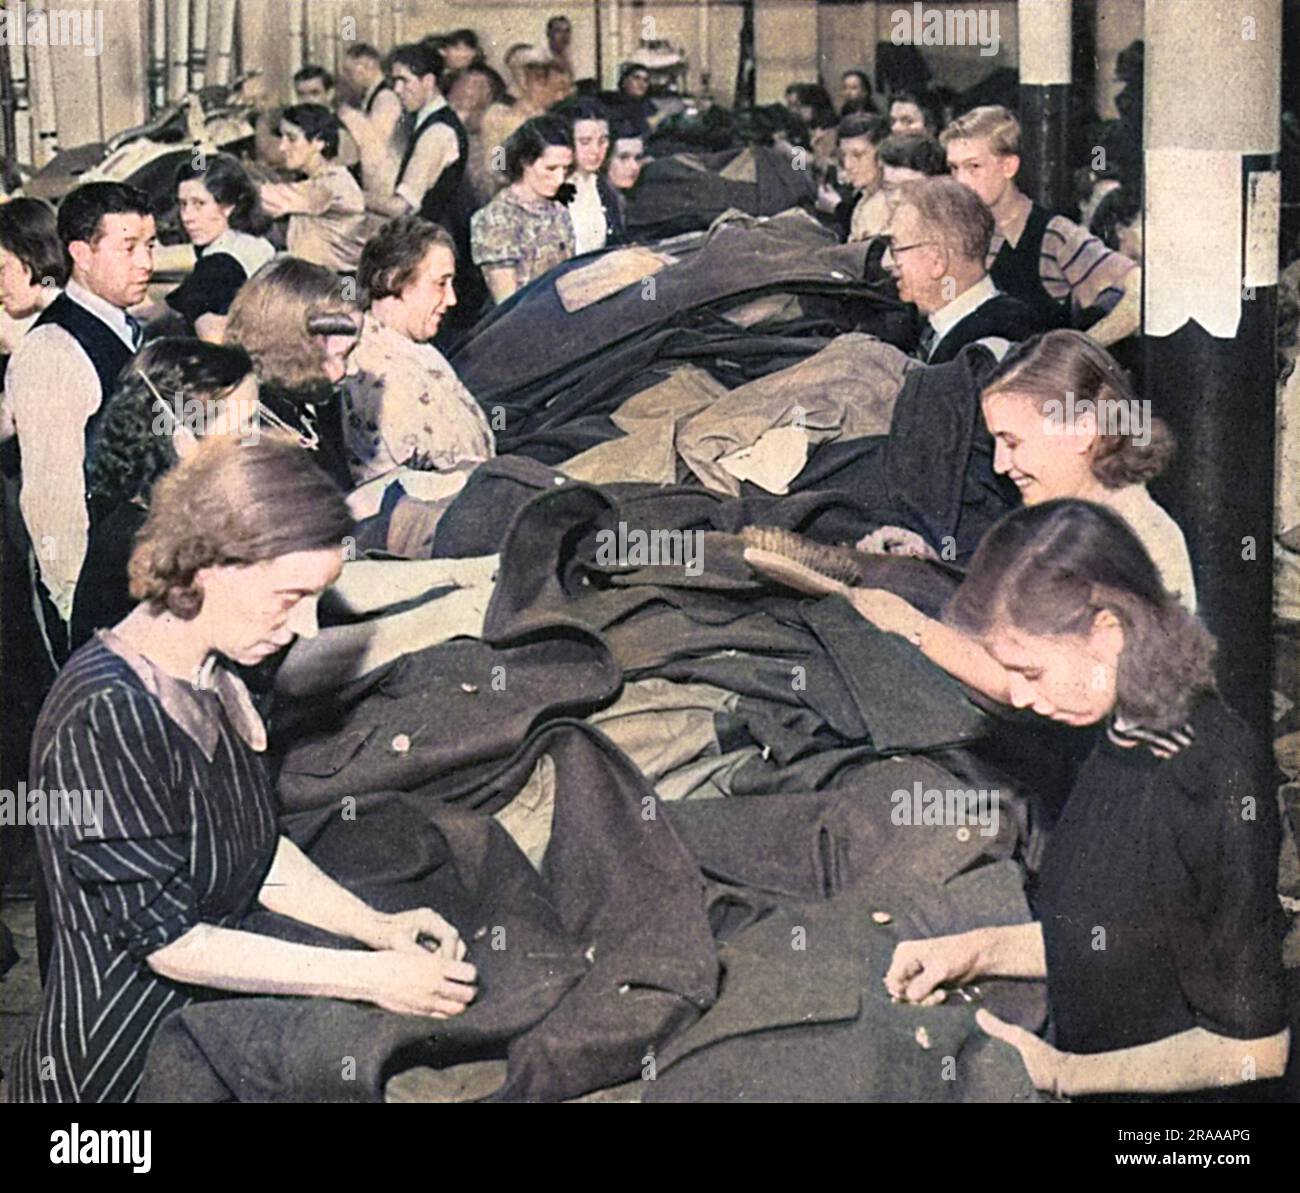 A great effort being made to get a big supply of greatcoats finished quickly so that no men may be caught by winter's grip without them.  Workers in an army clothing factory busy sewing buttons on coats for British servicemen during World War Two.     Date: 1939 Stock Photo